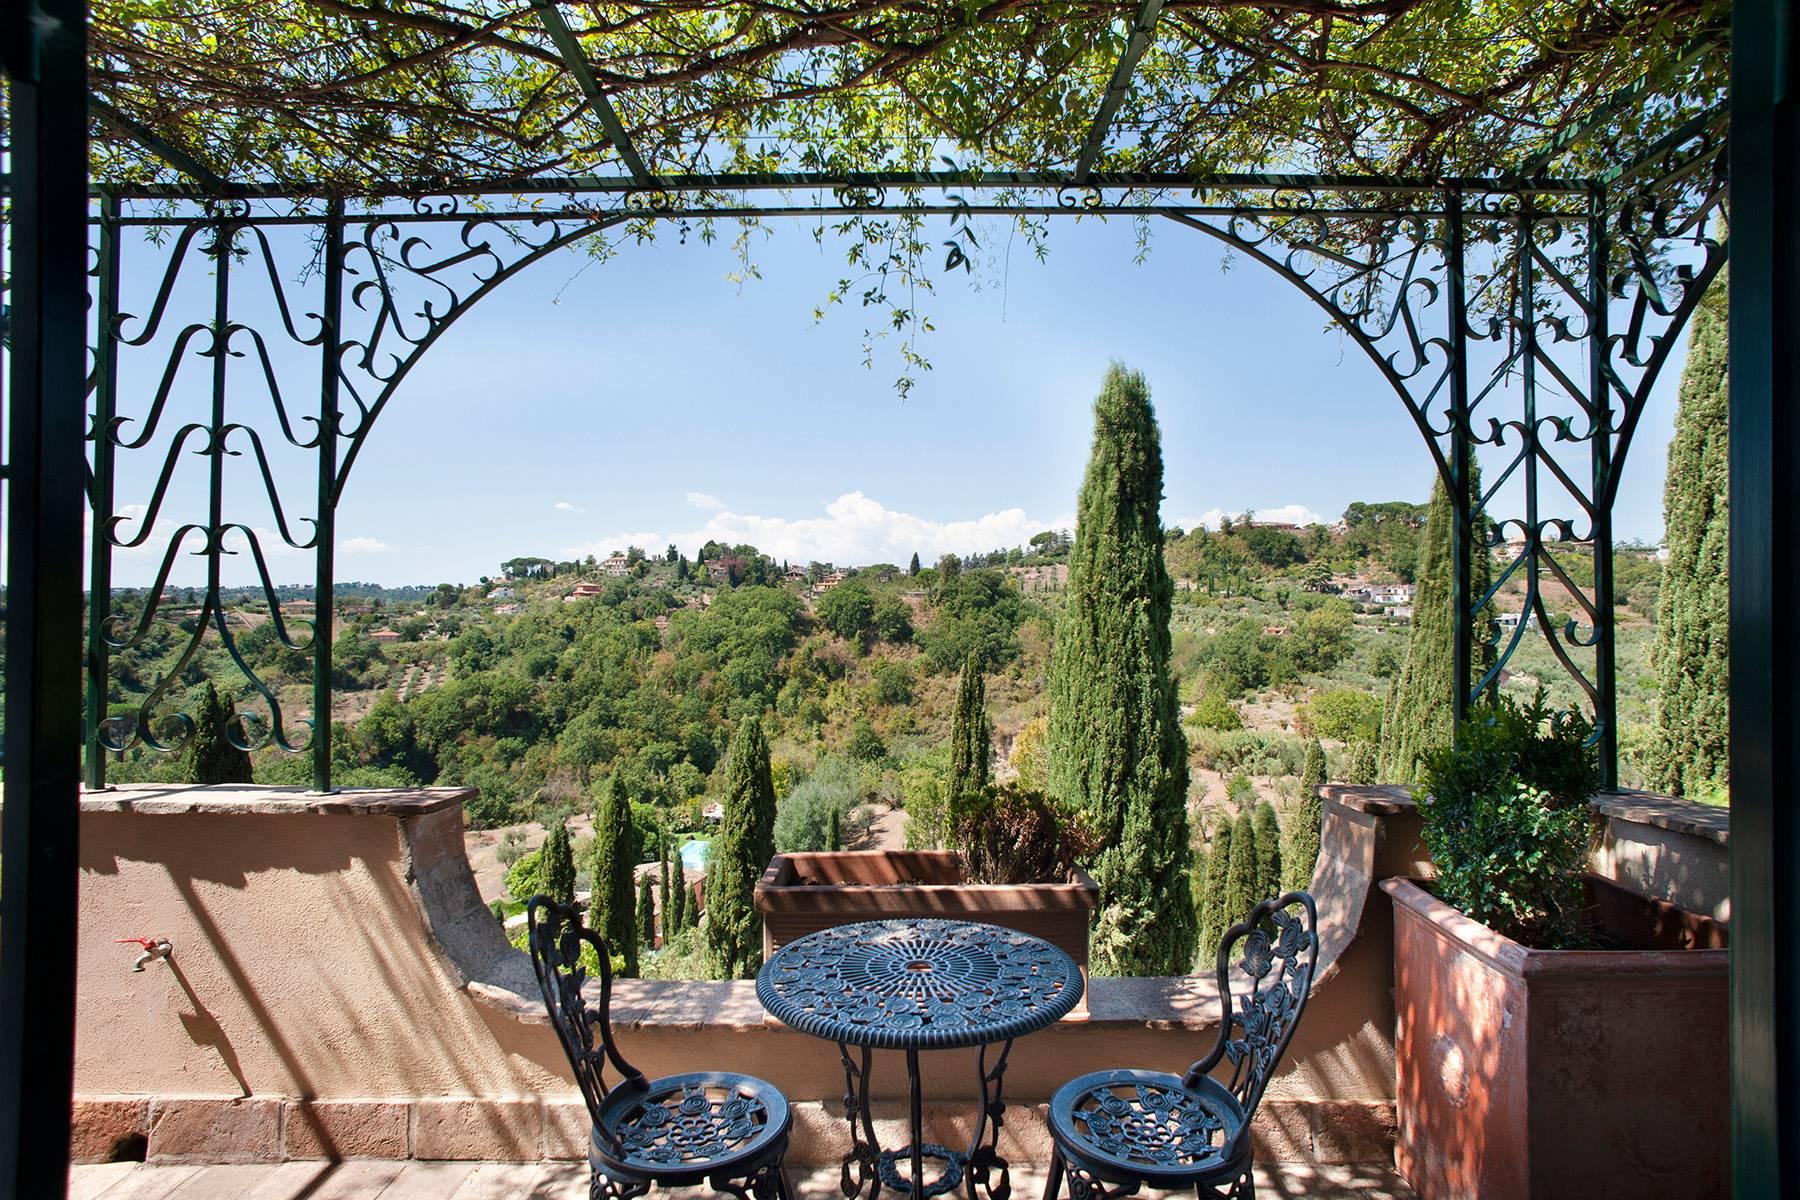 Villa Nayara - Lovely mansion with swimming pool 30 minutes from Rome - 46